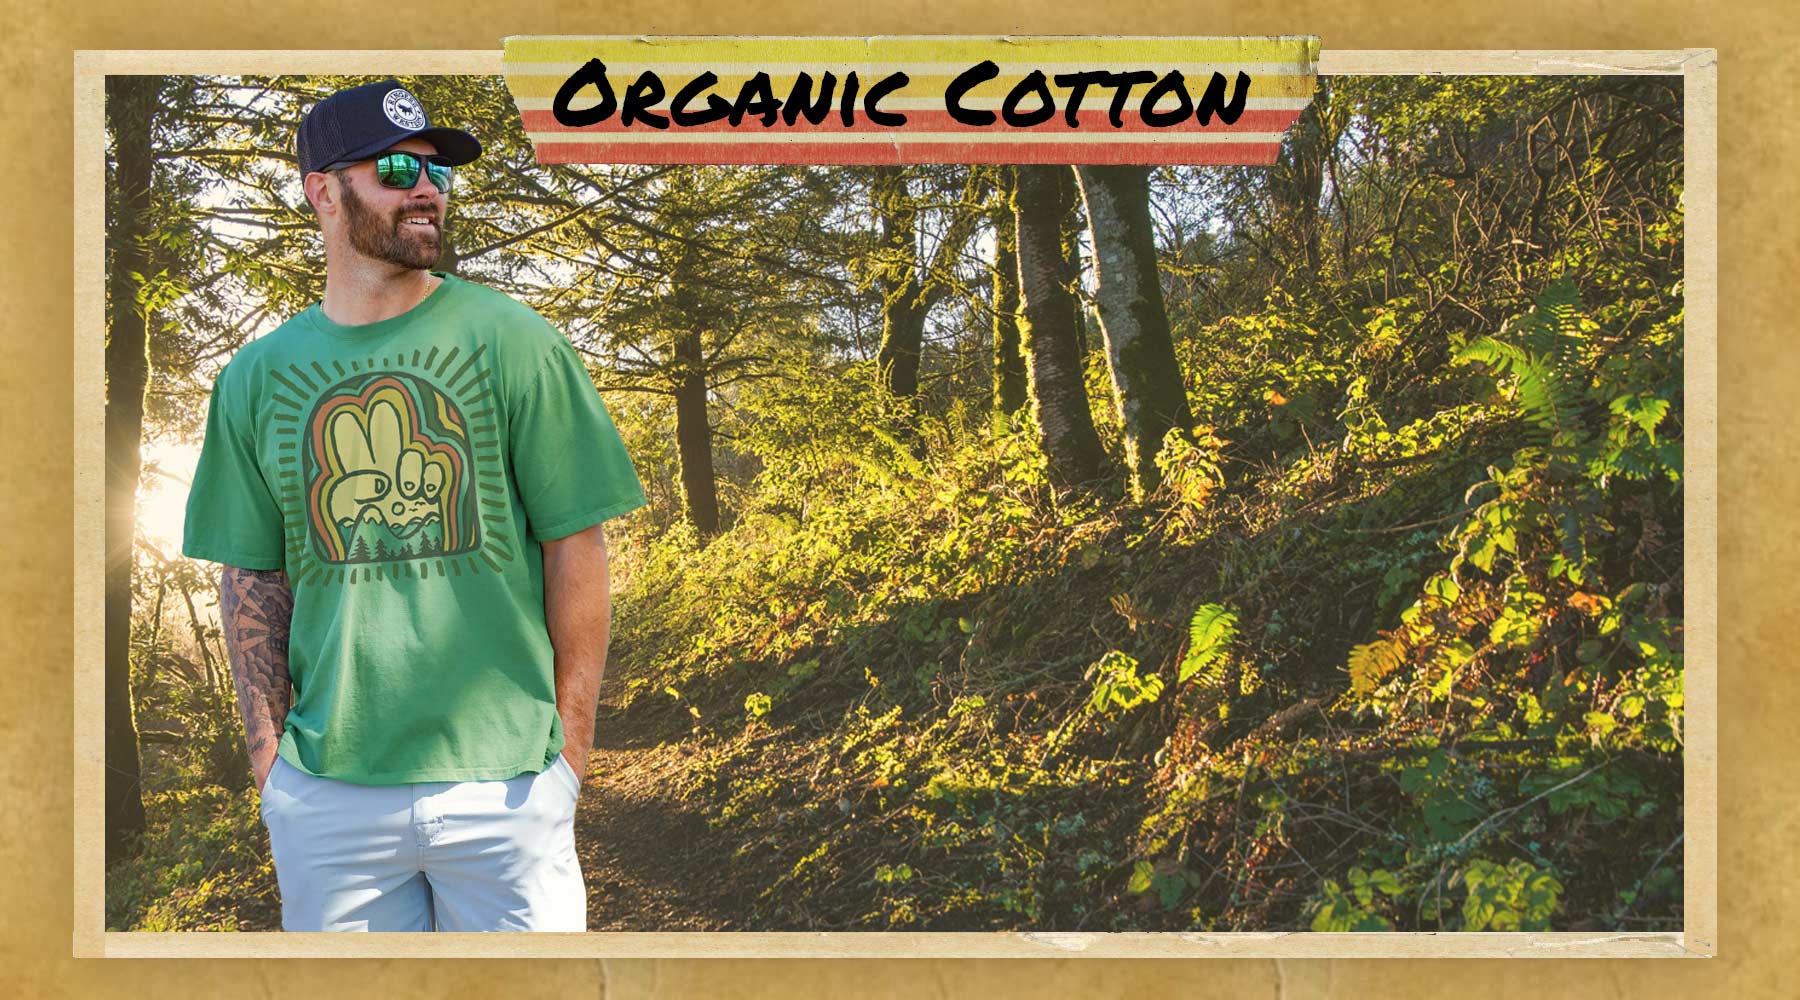 Cool Organic Cotton T-shirts | Vintage Inspired Ecofriendly Tees